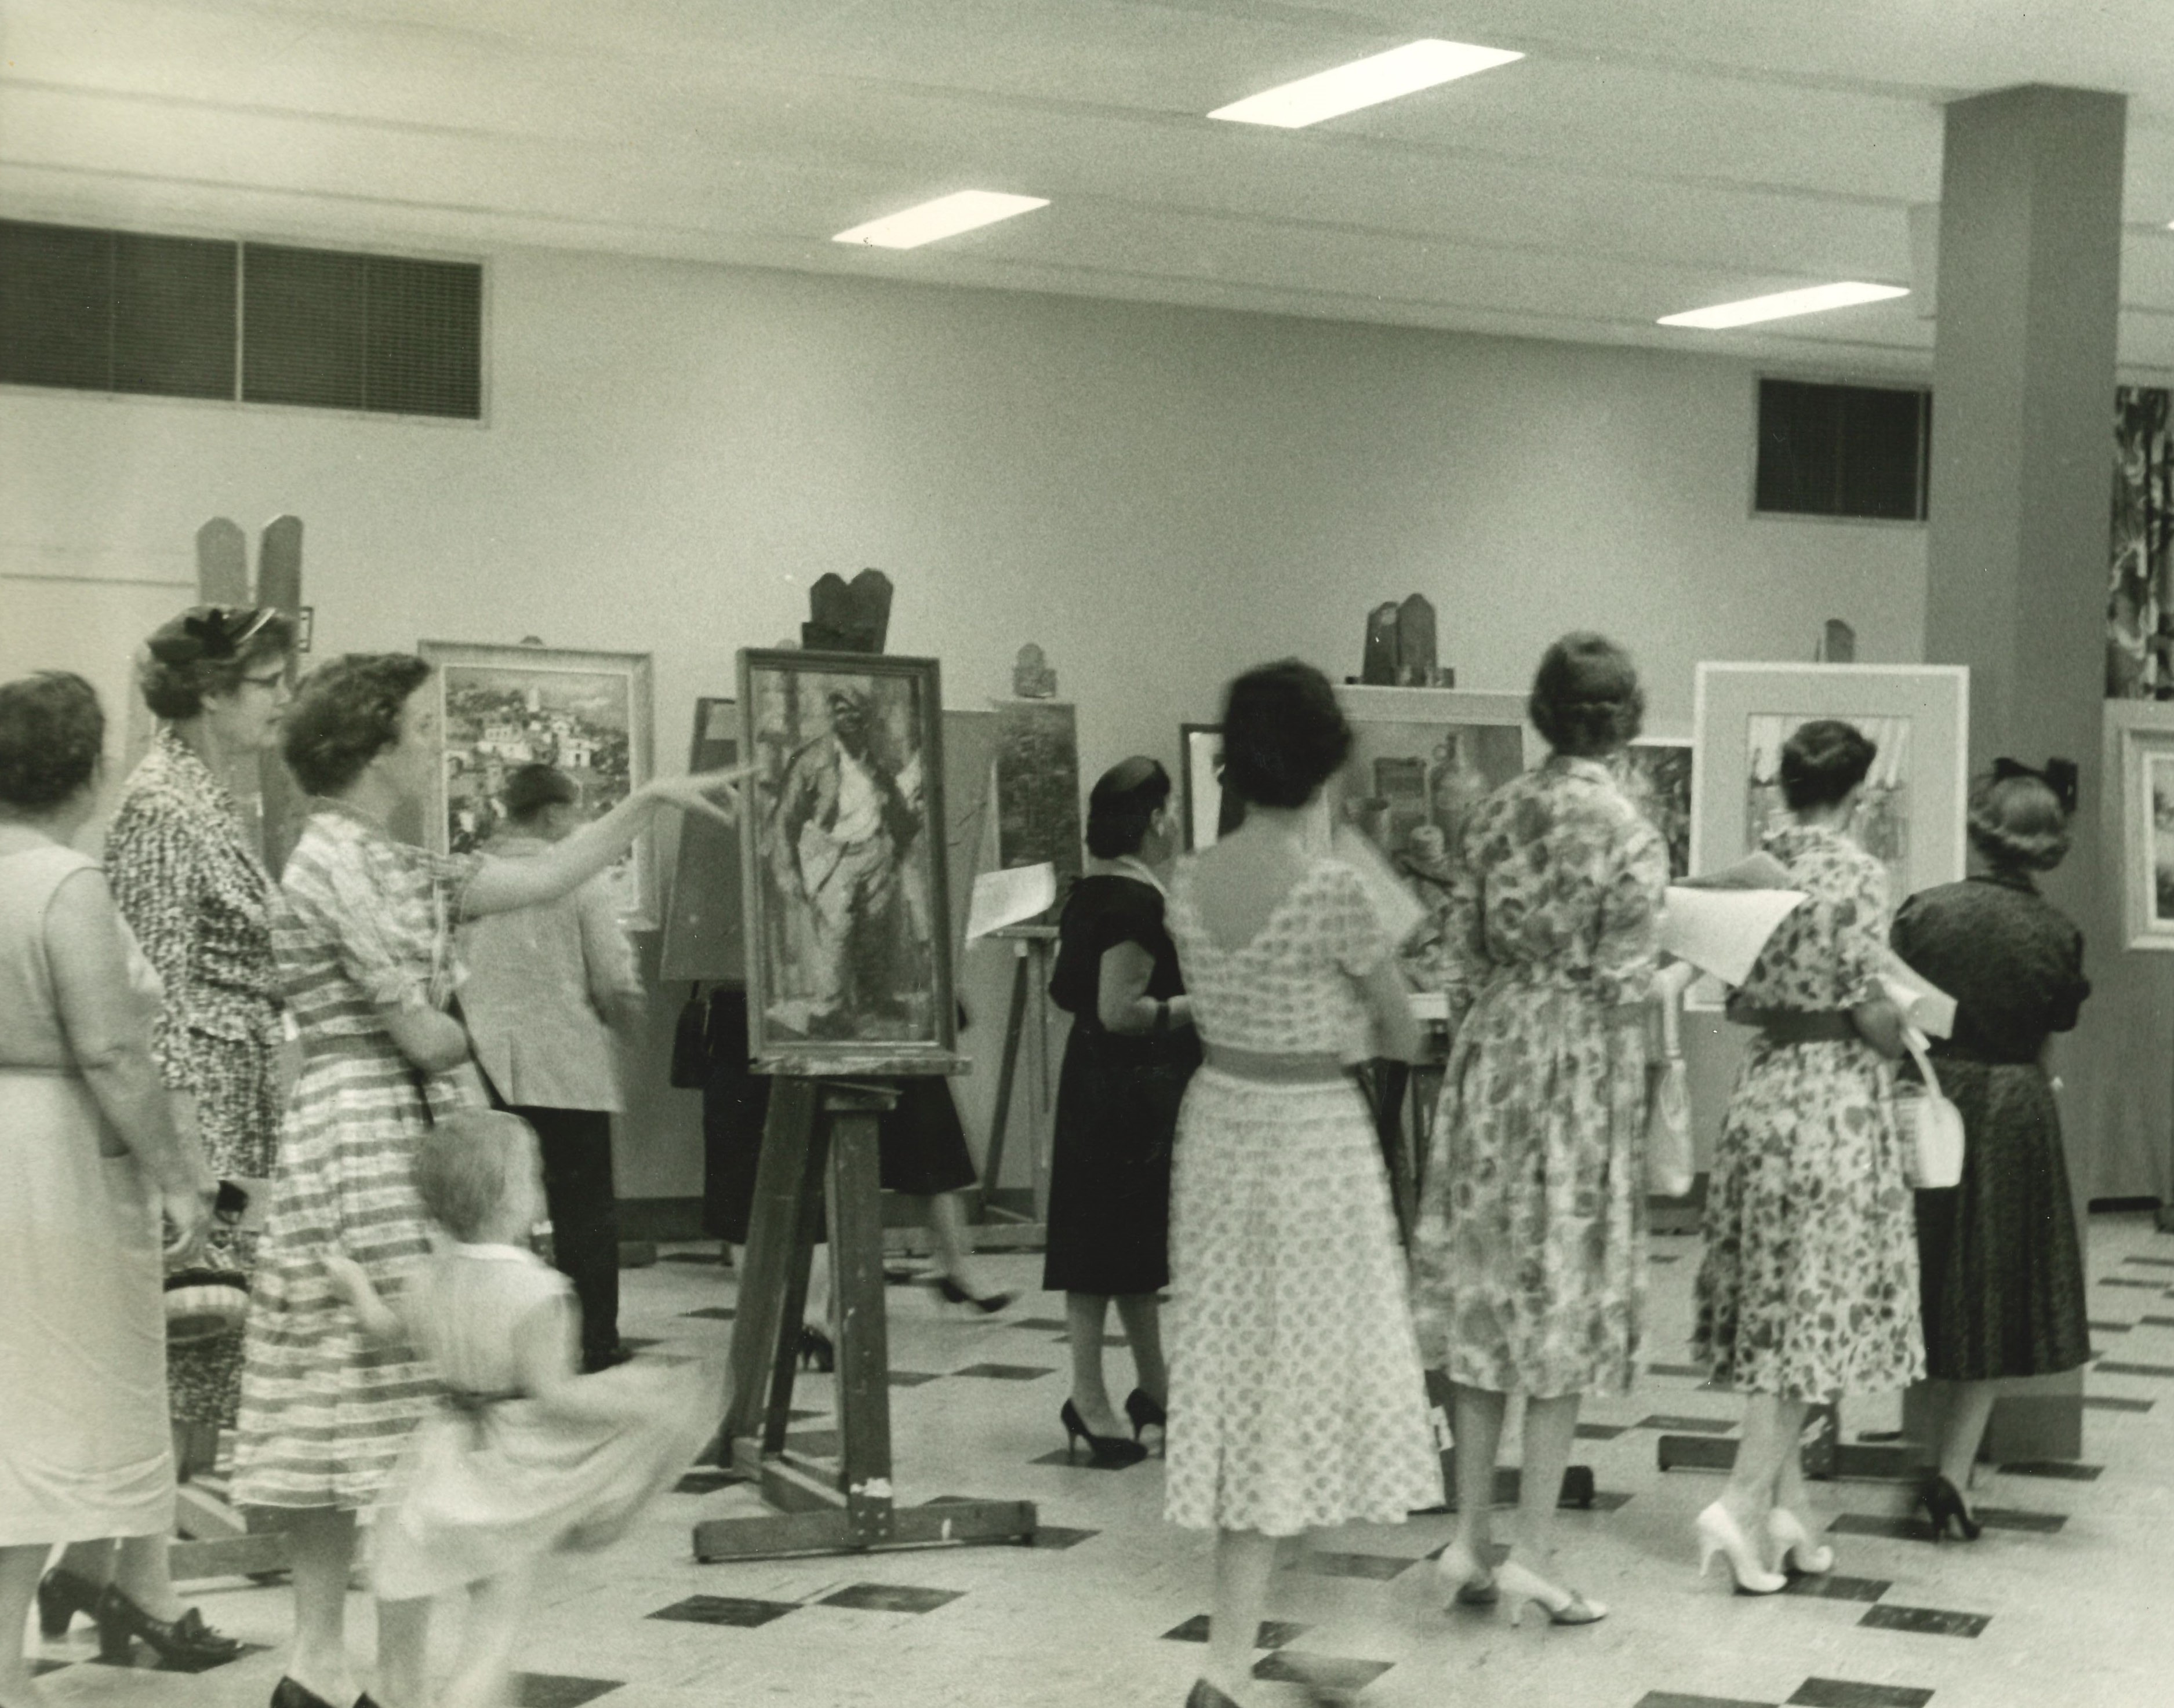 a group of women look at paintings on display in the 1950s